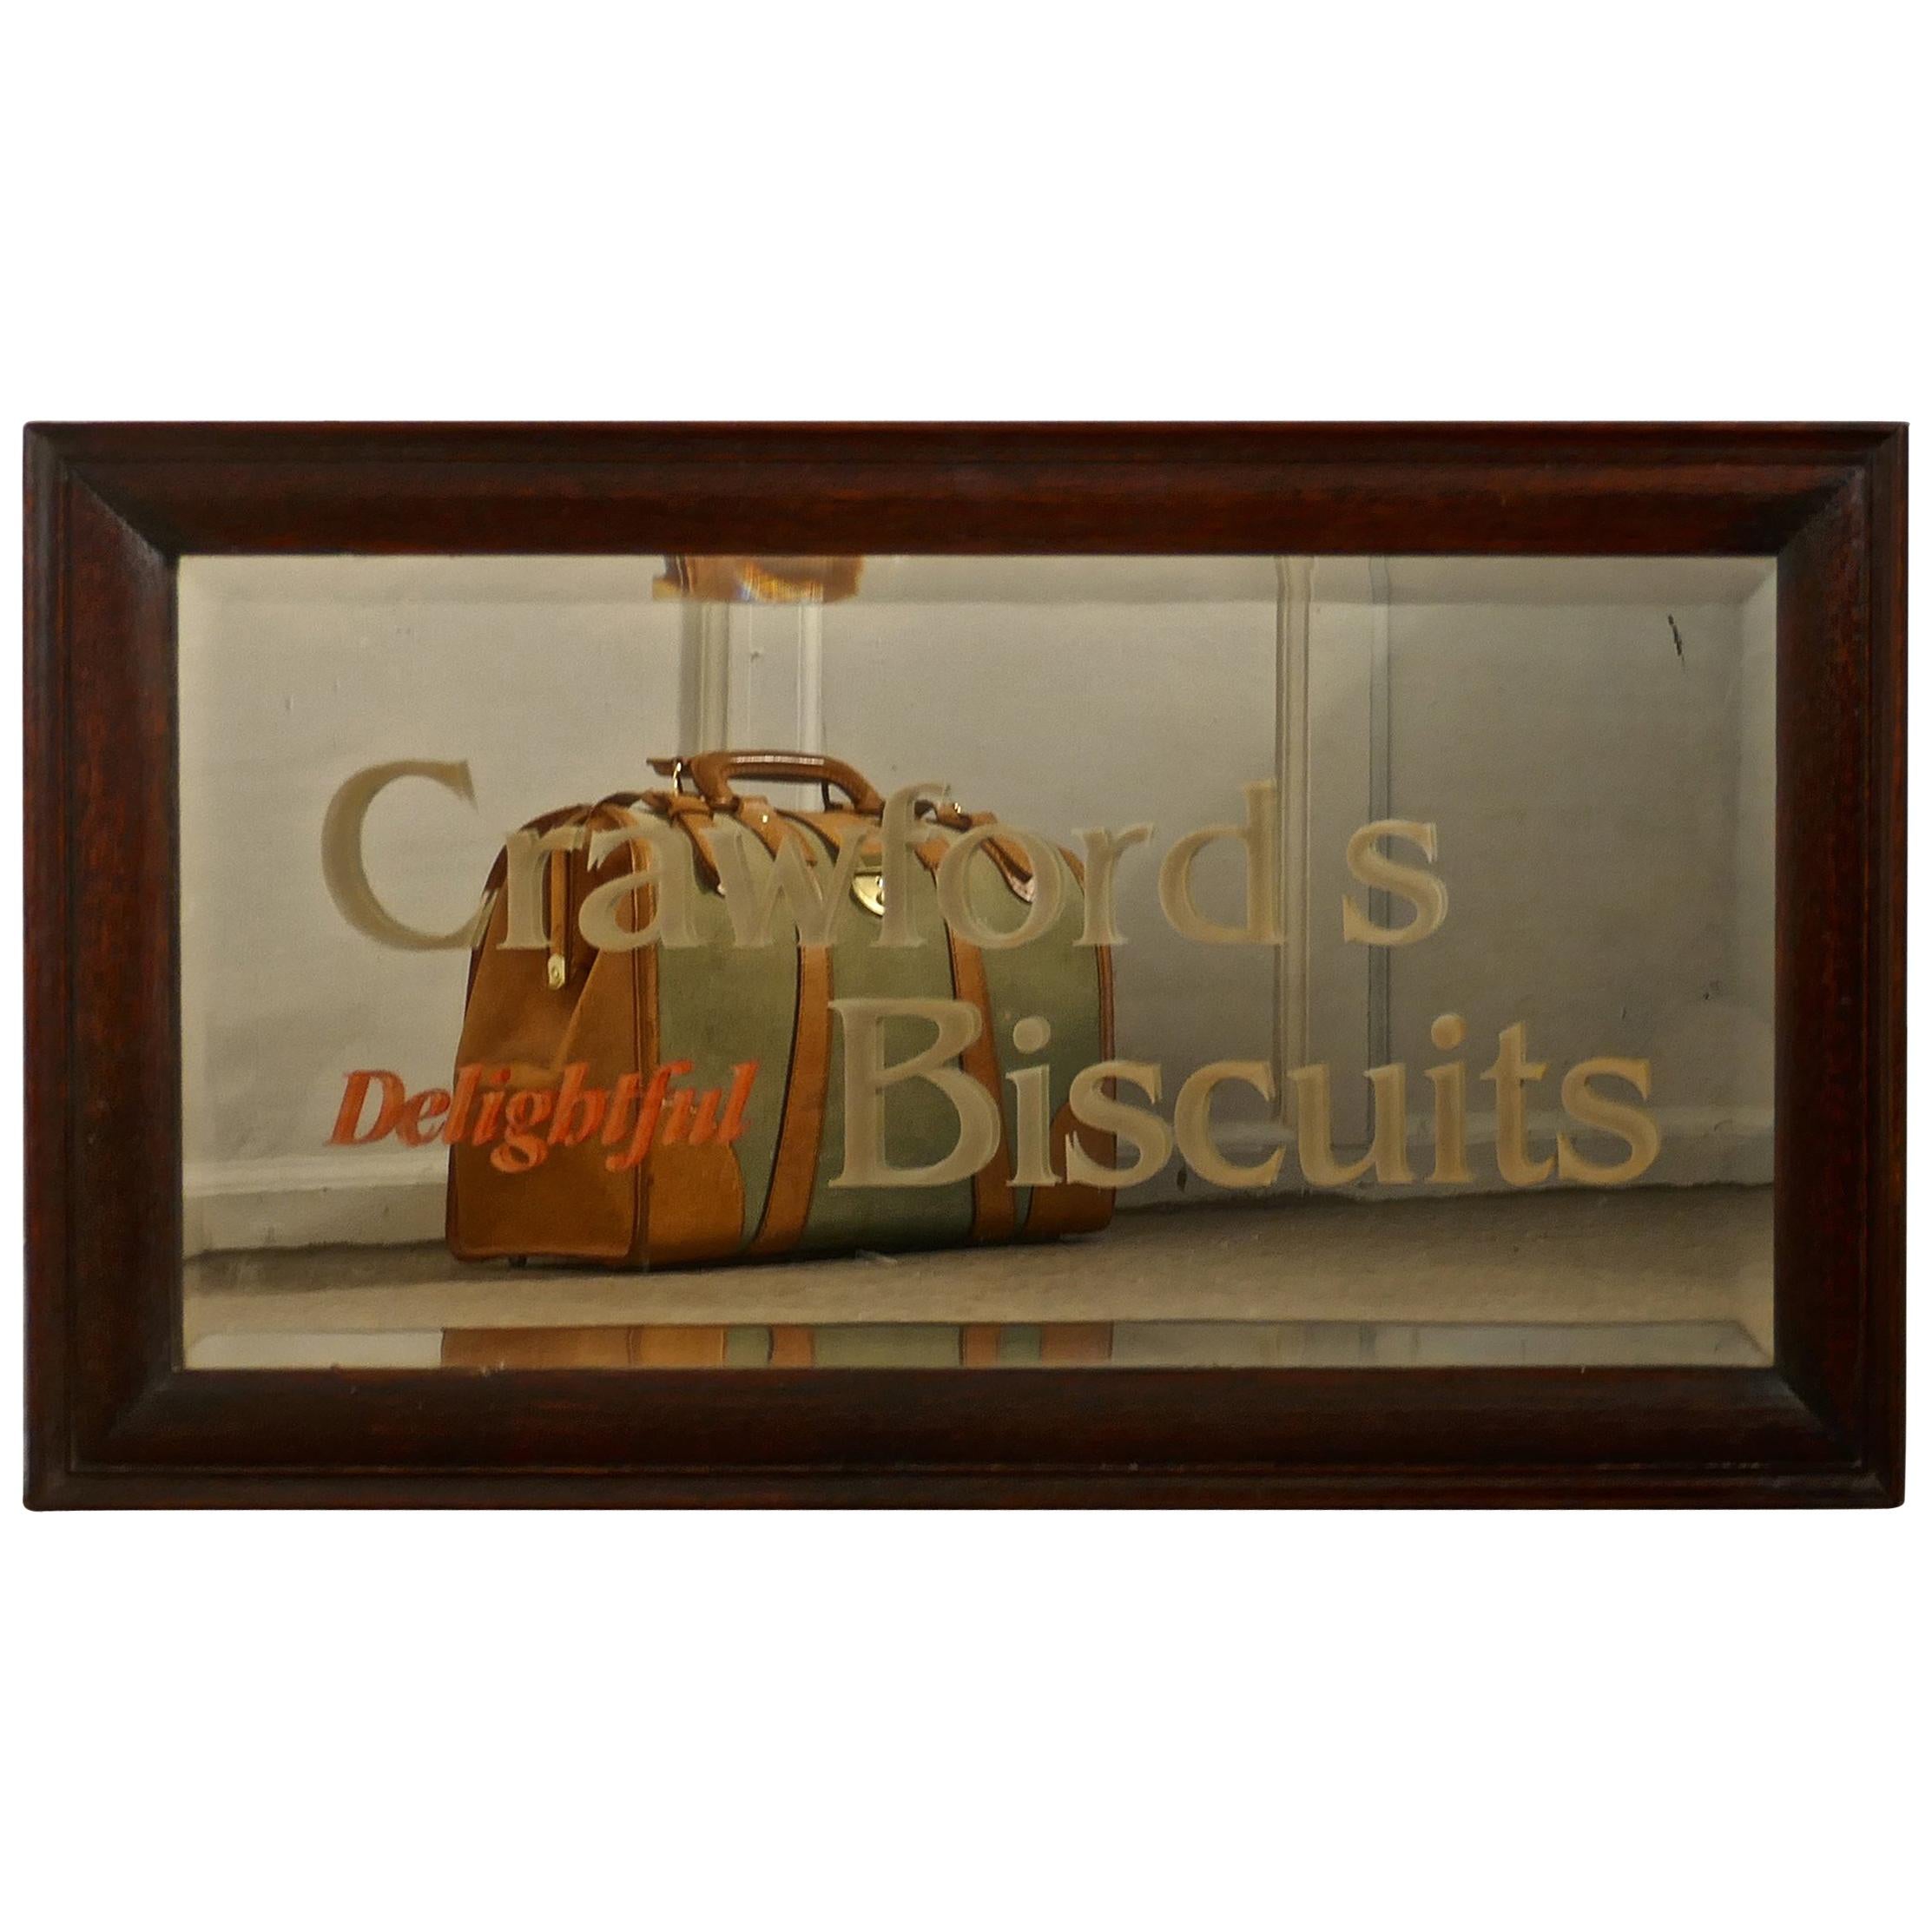 Miroir publicitaire Crawford's Delightful Biscuits Baker or Cafe 